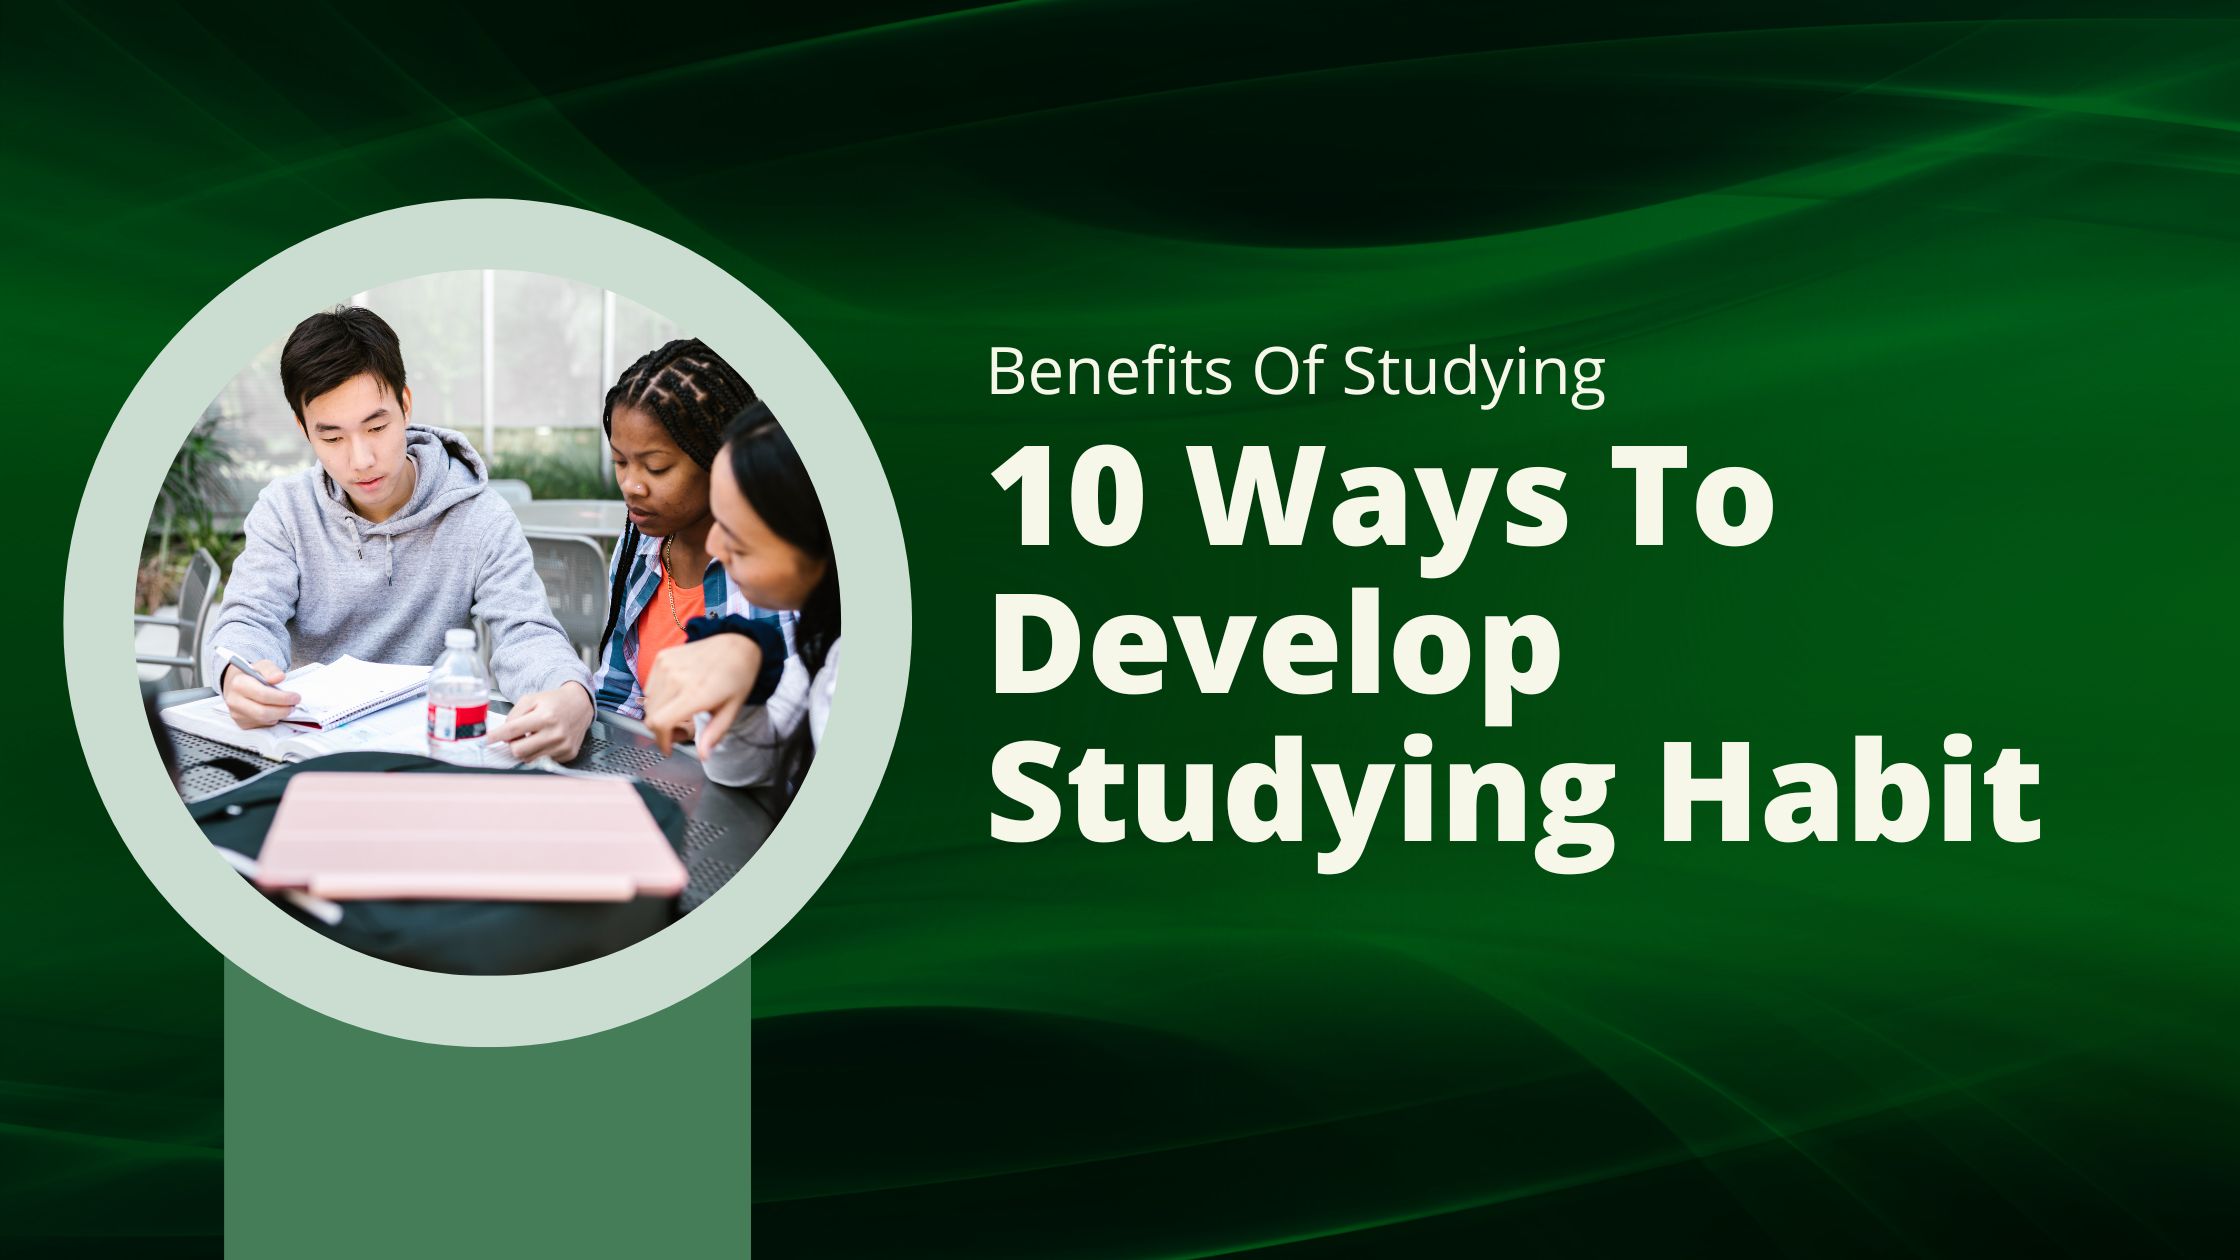 Benefits Of Studying: 10 Ways To Develop Studying Habit